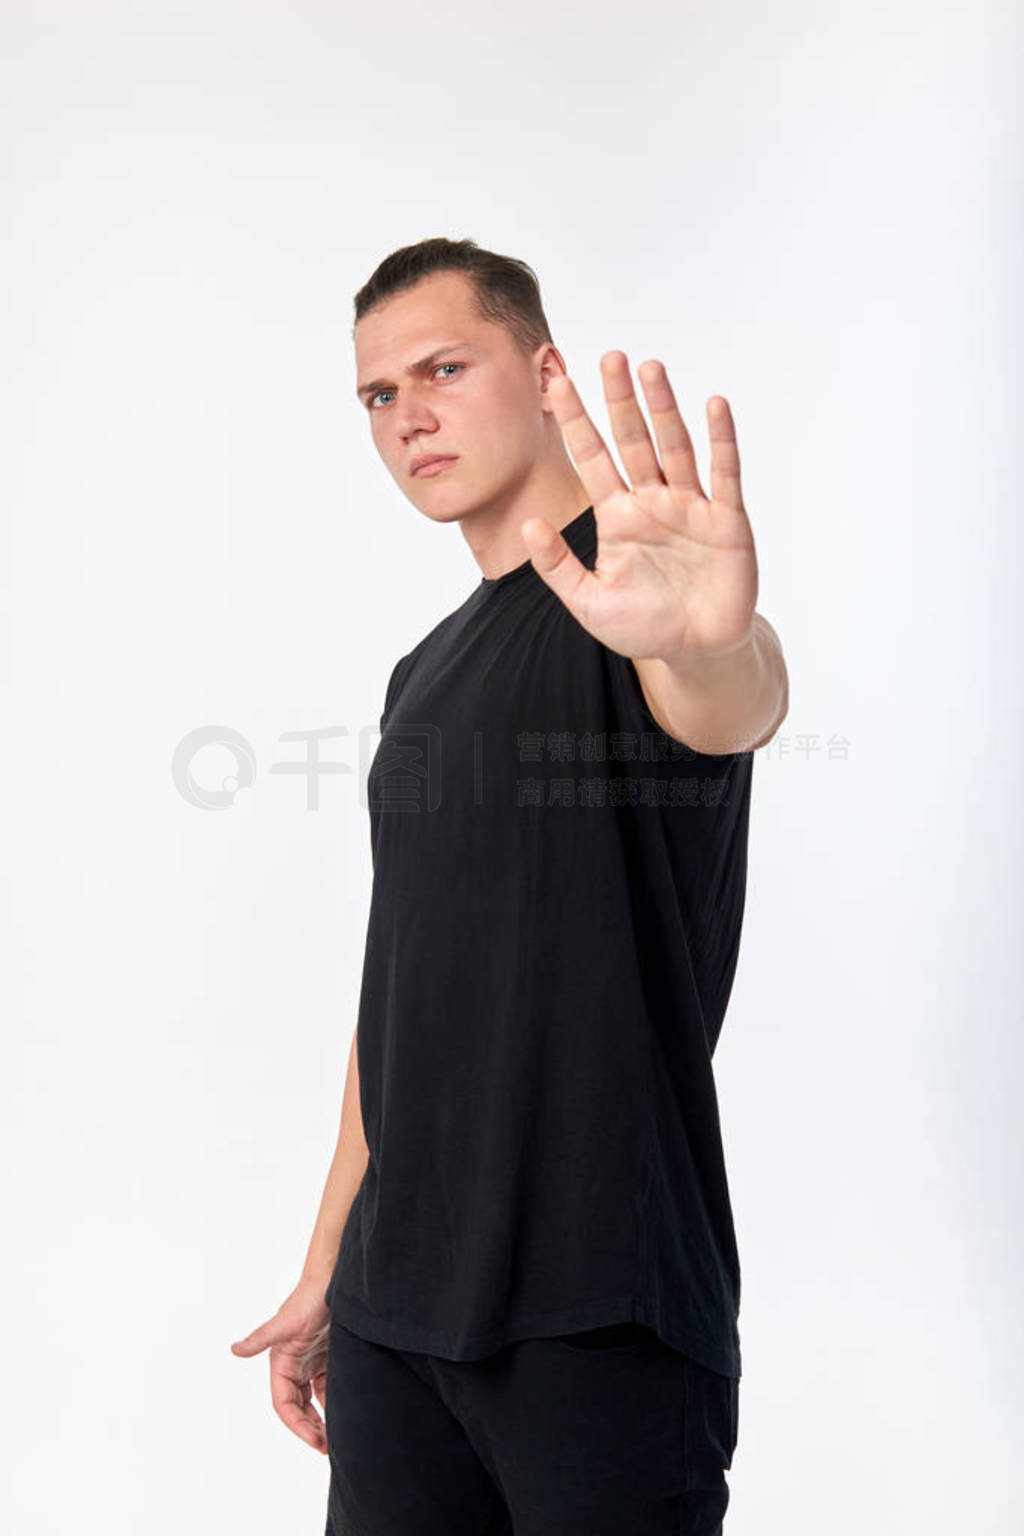 Body language. Young unhappy man showing a gesture of denial or